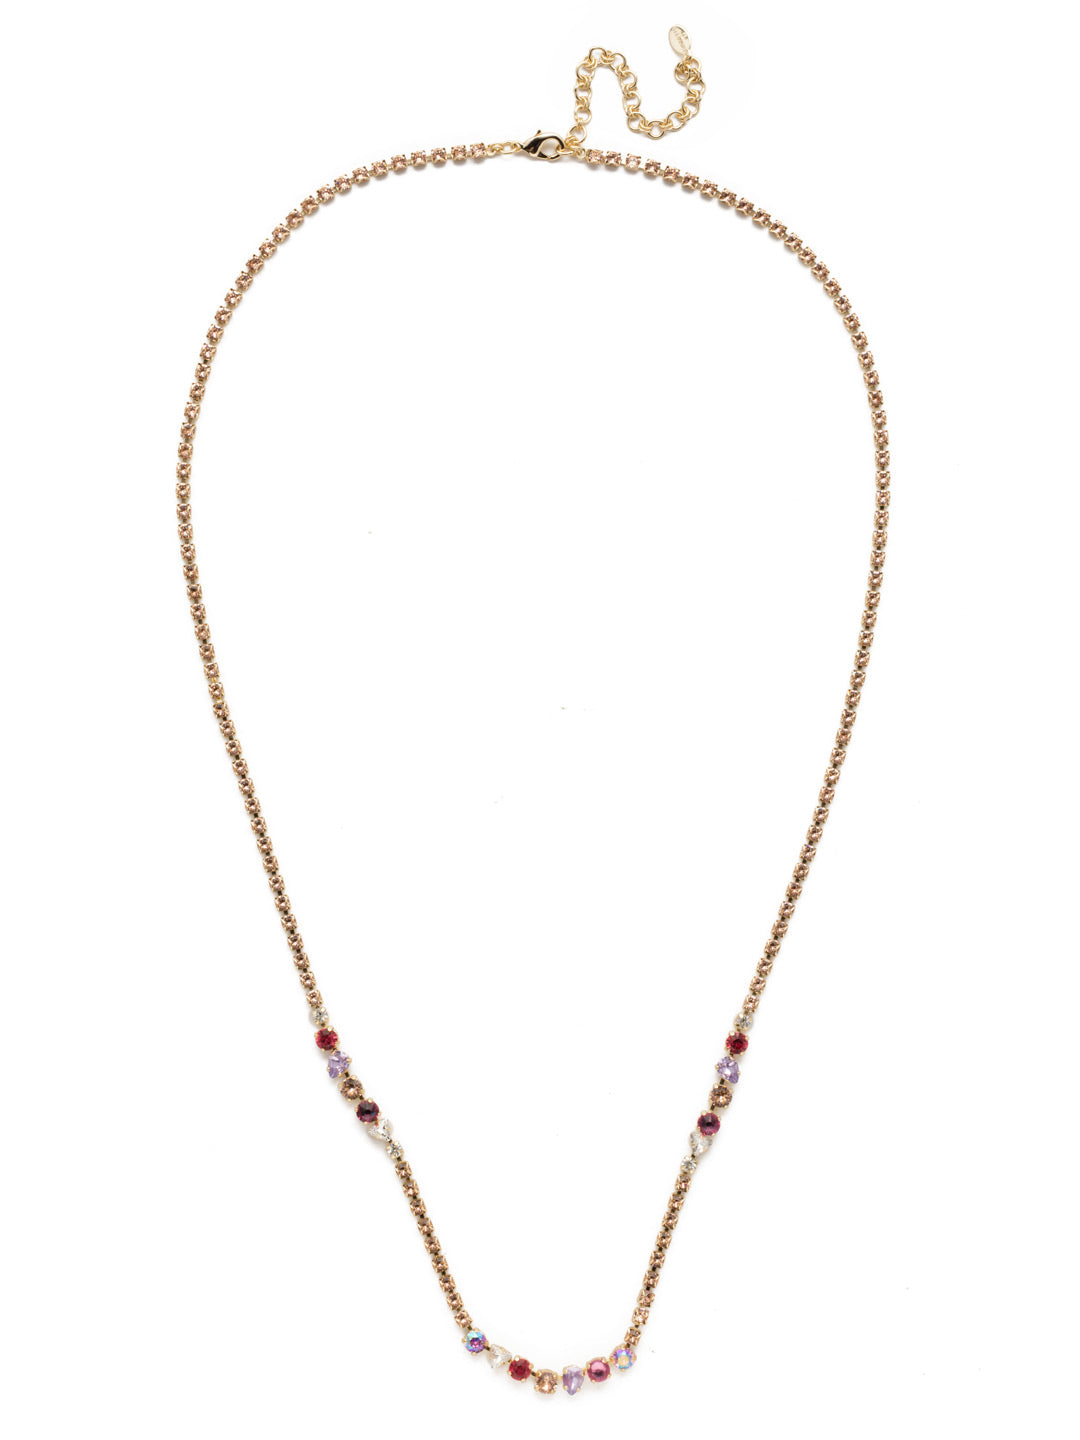 Simple Sparkle Rhinestone Antique Brass Large Teardrop Necklace #NC610-AB |  Cool Water Jewelry